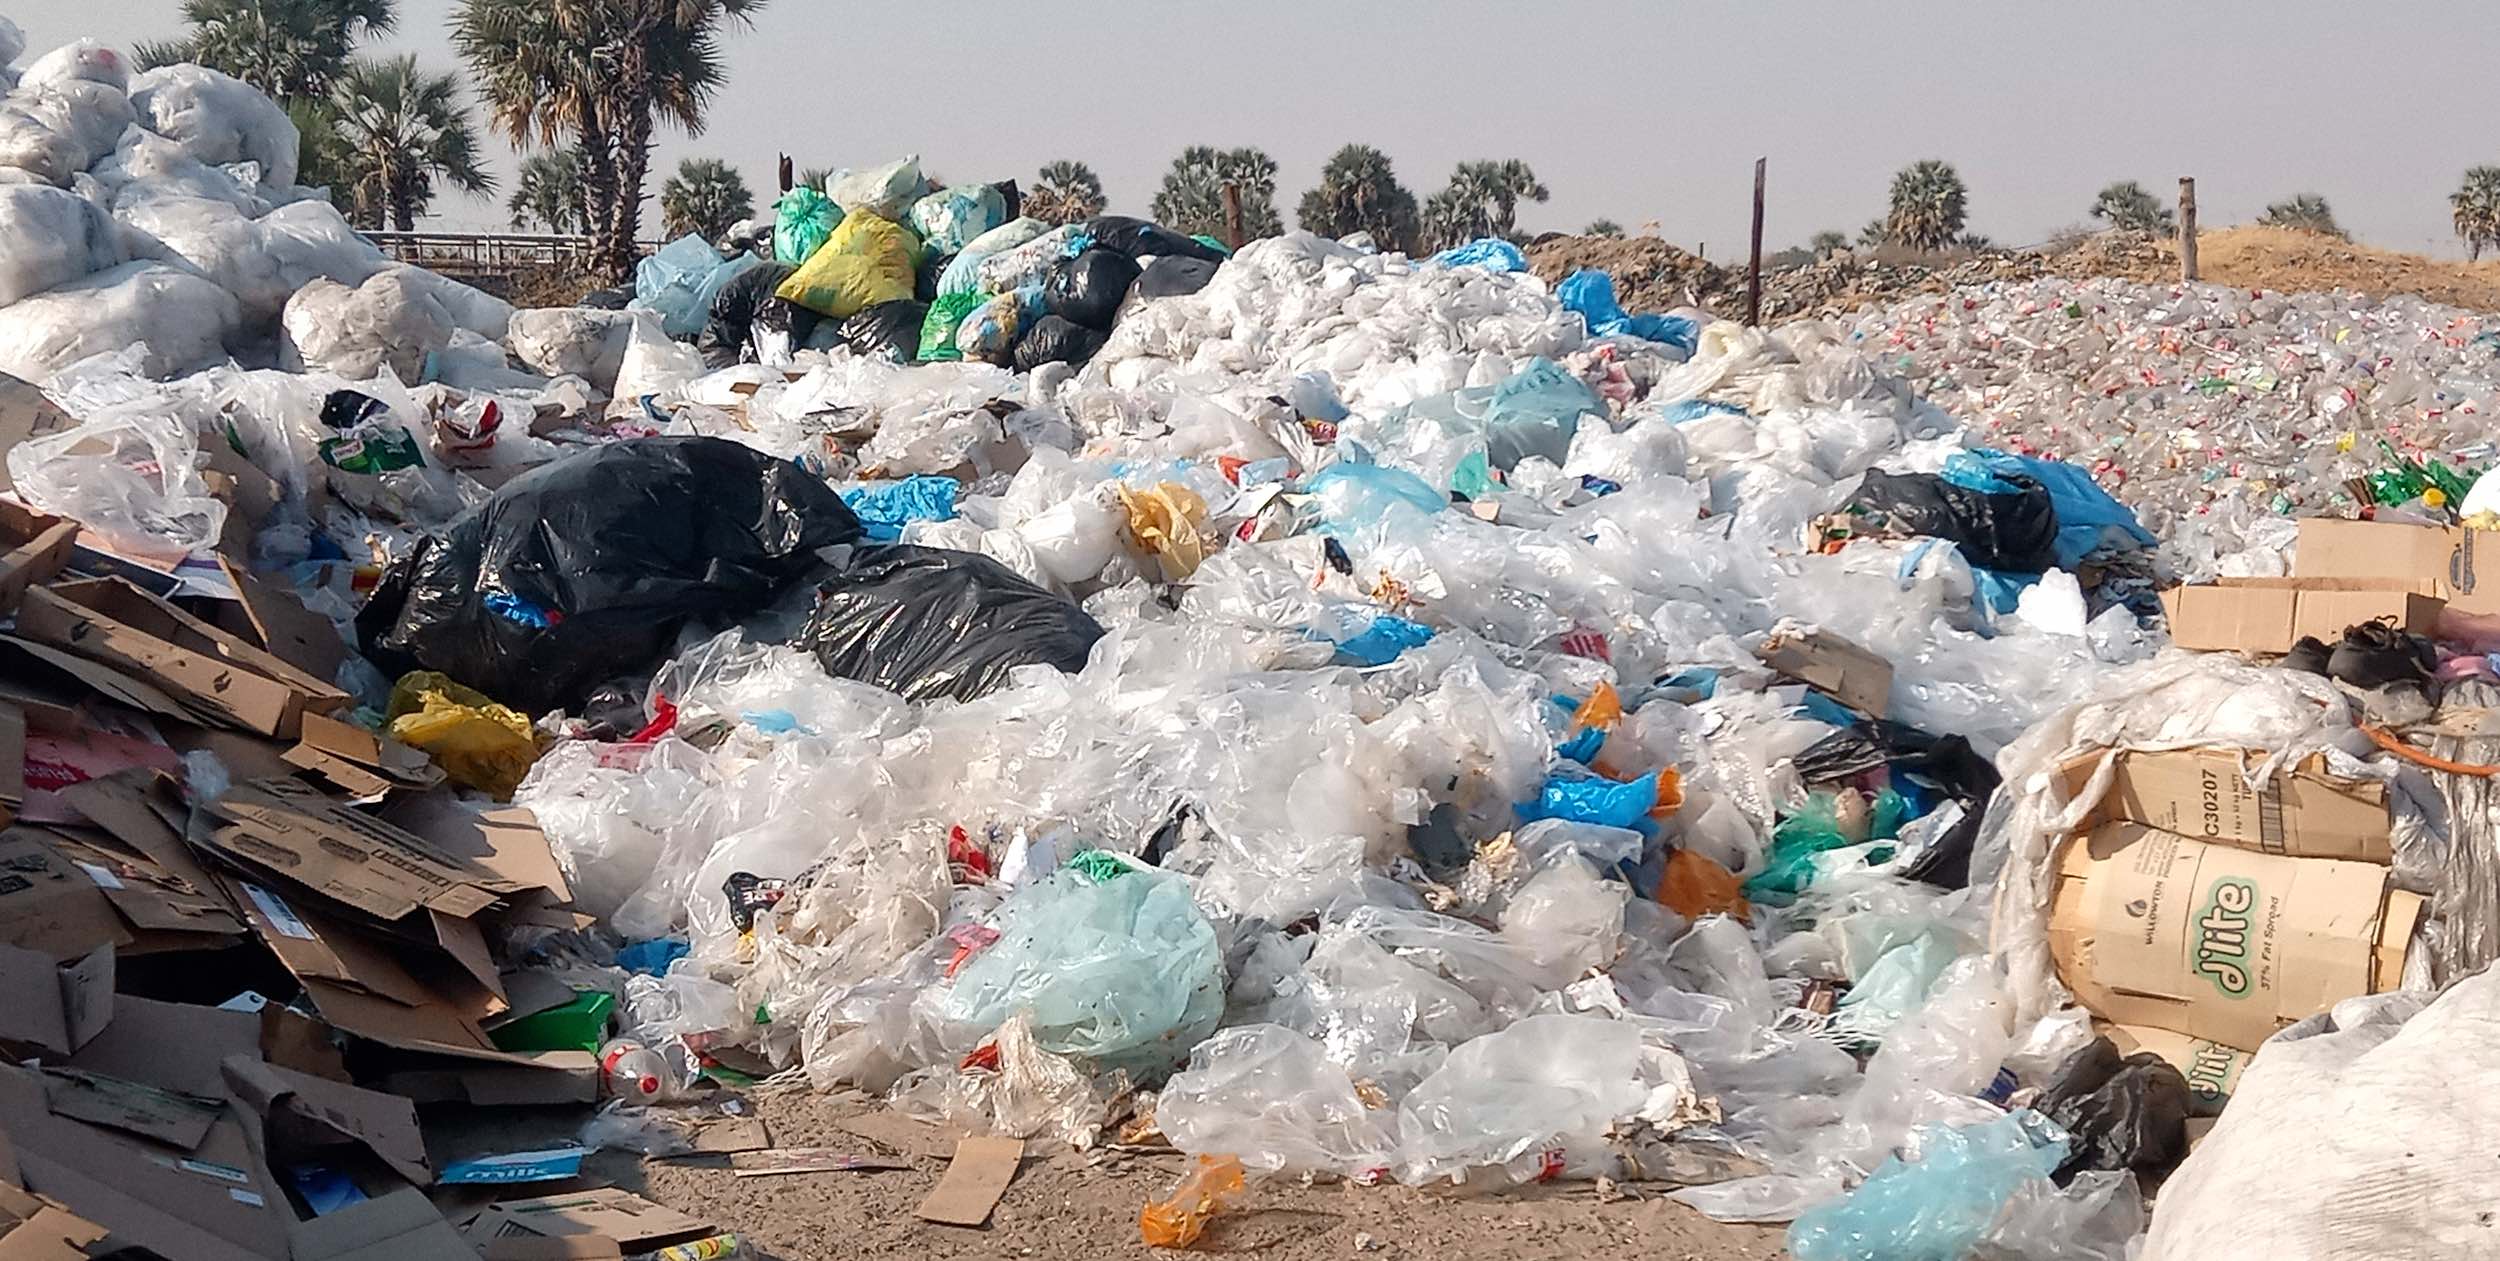 A huge mountain of plastic fills this local tip